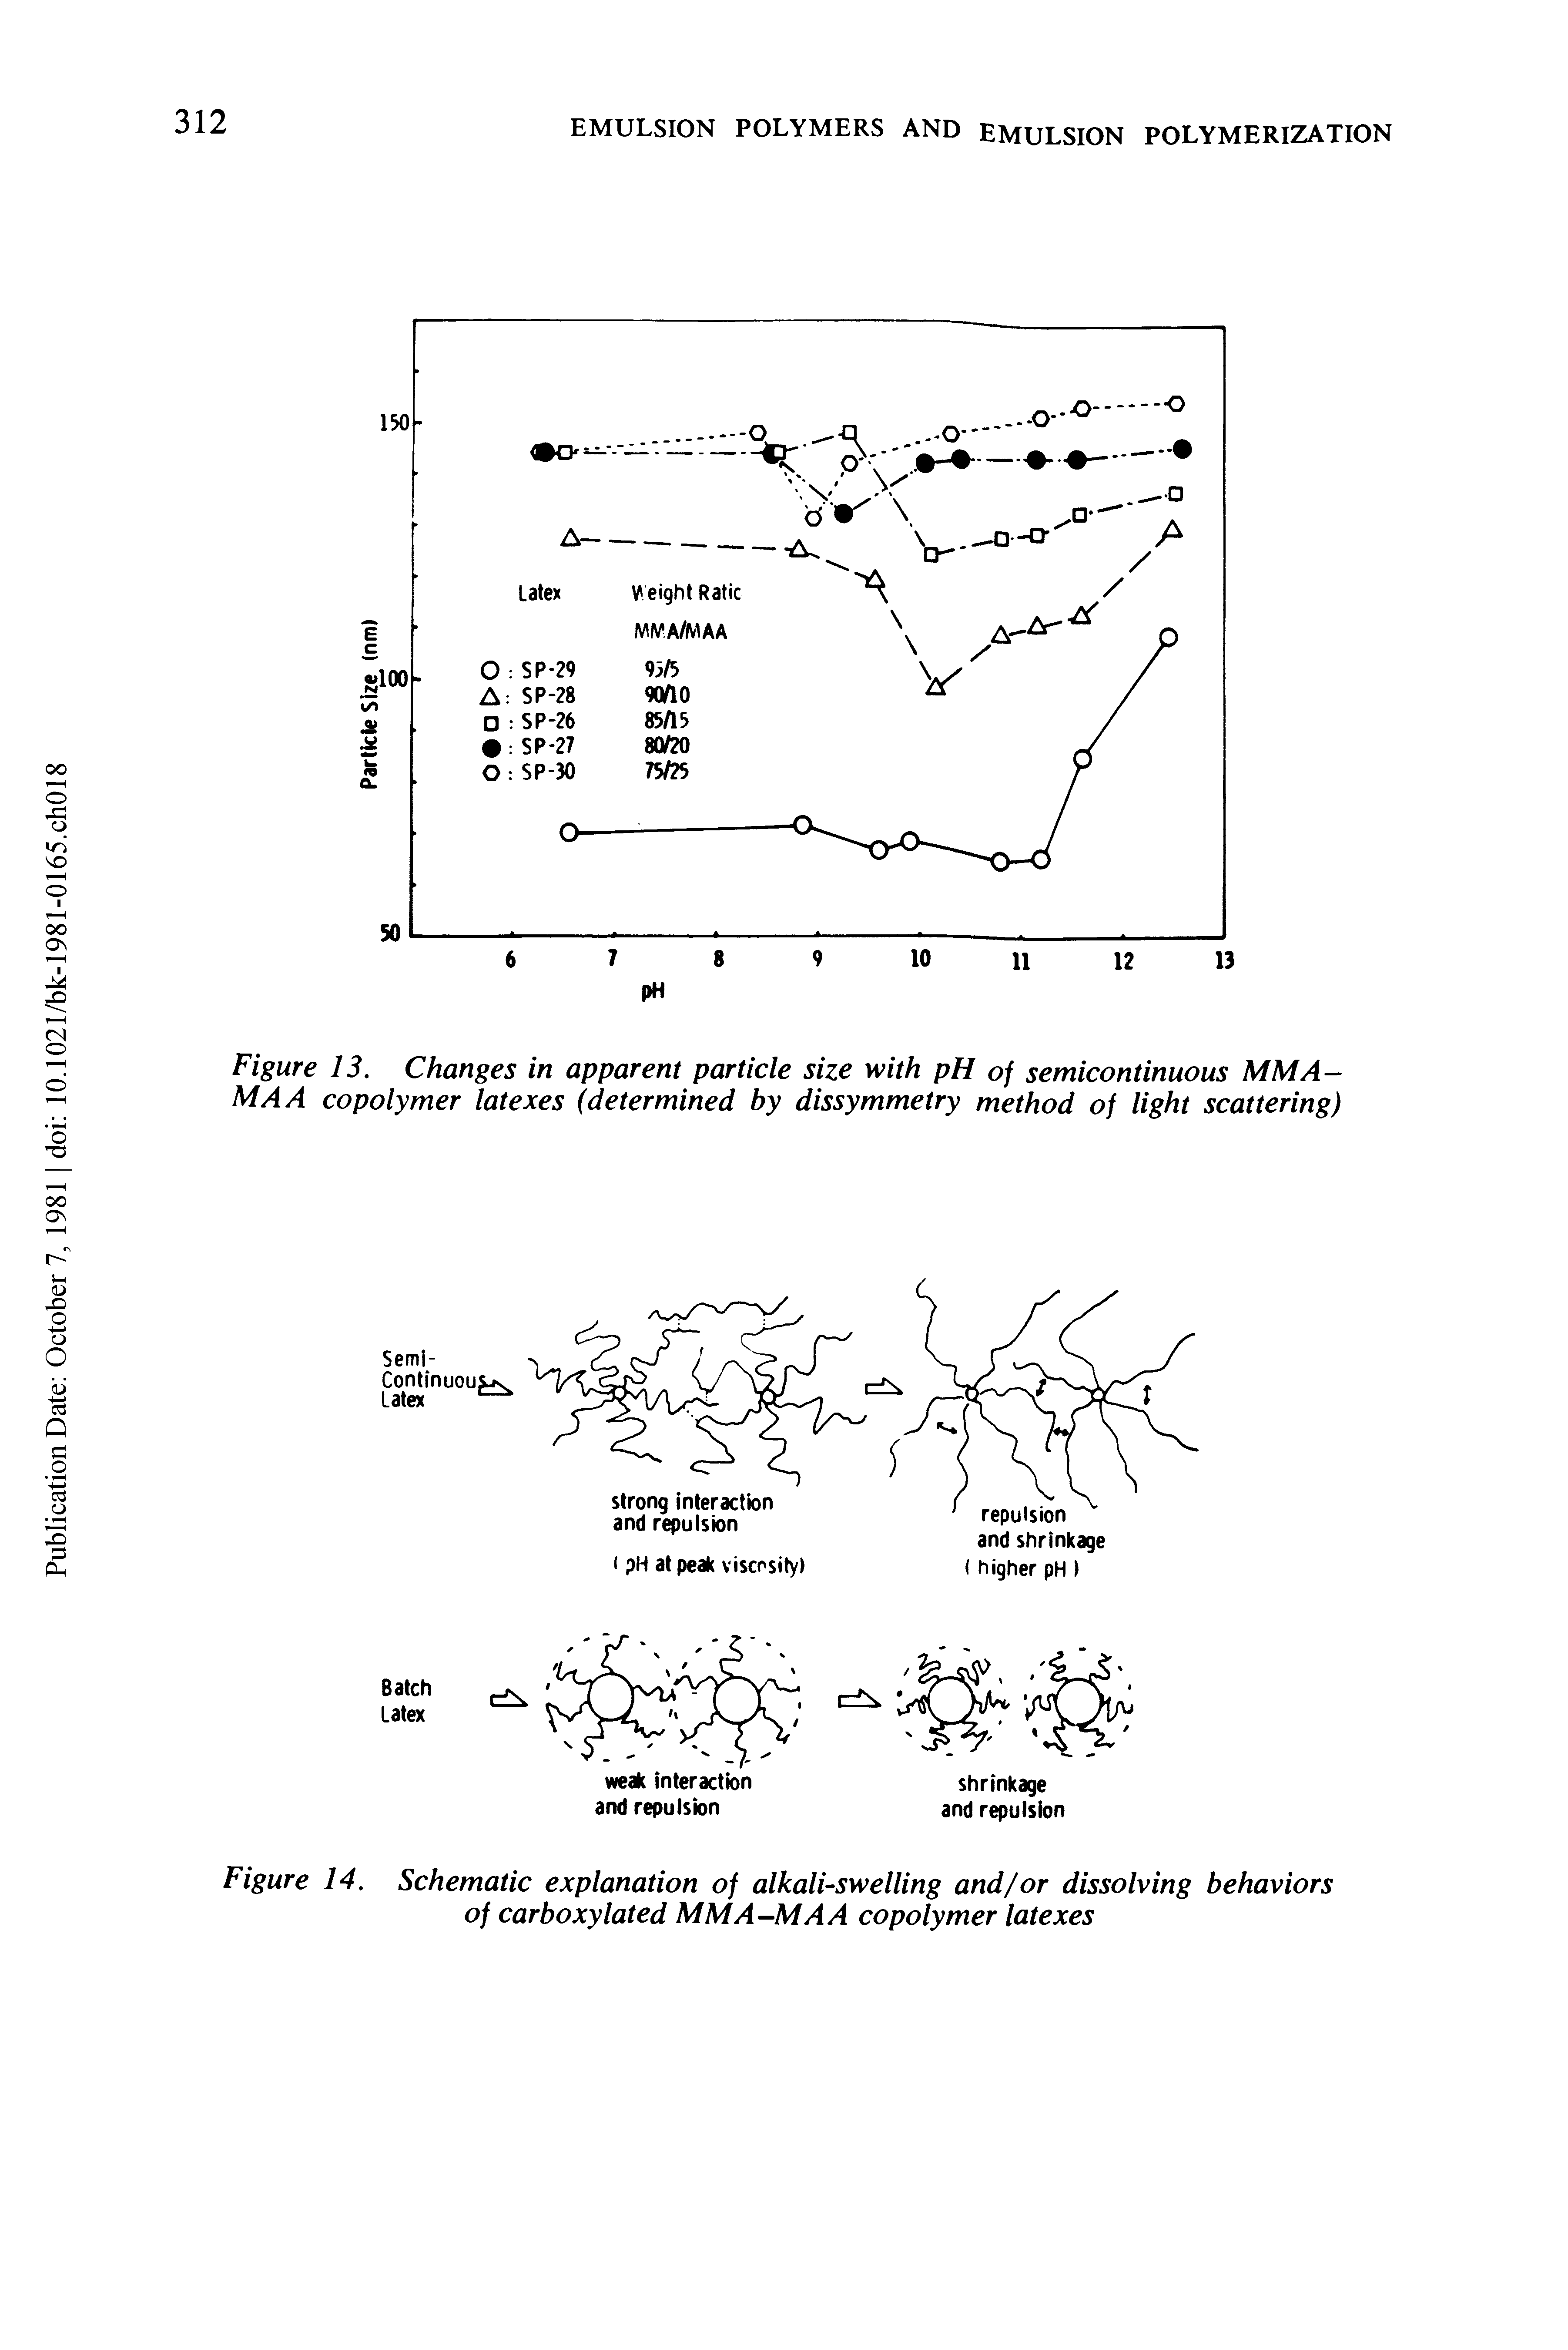 Figure 14. Schematic explanation of alkali-swelling and/or dissolving behaviors of carboxylated MMA-MAA copolymer latexes...